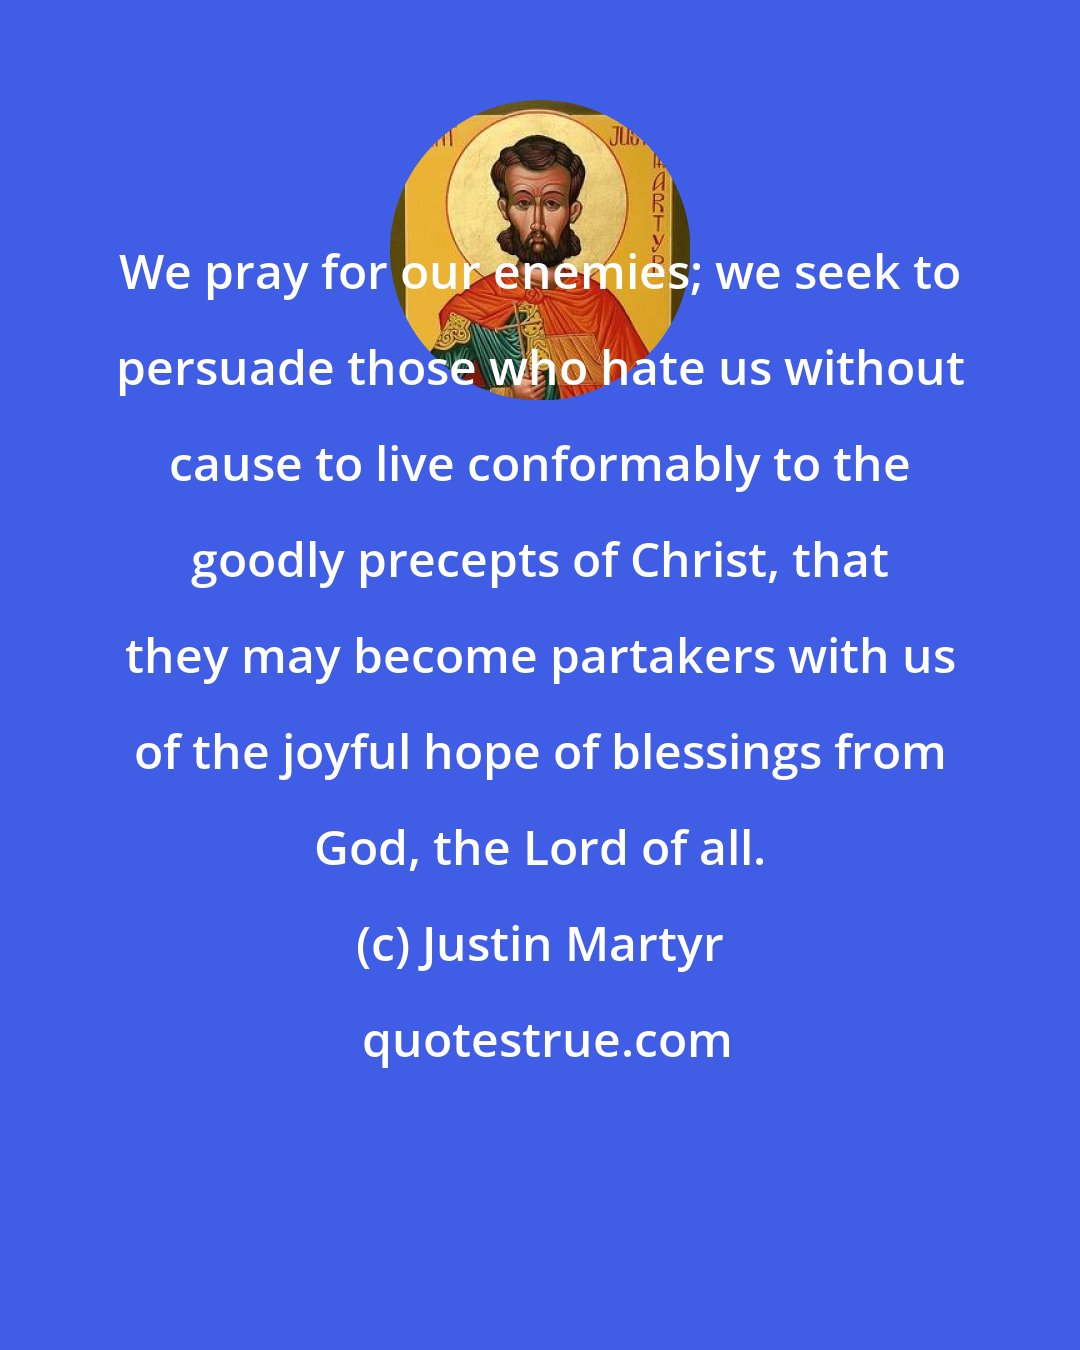 Justin Martyr: We pray for our enemies; we seek to persuade those who hate us without cause to live conformably to the goodly precepts of Christ, that they may become partakers with us of the joyful hope of blessings from God, the Lord of all.